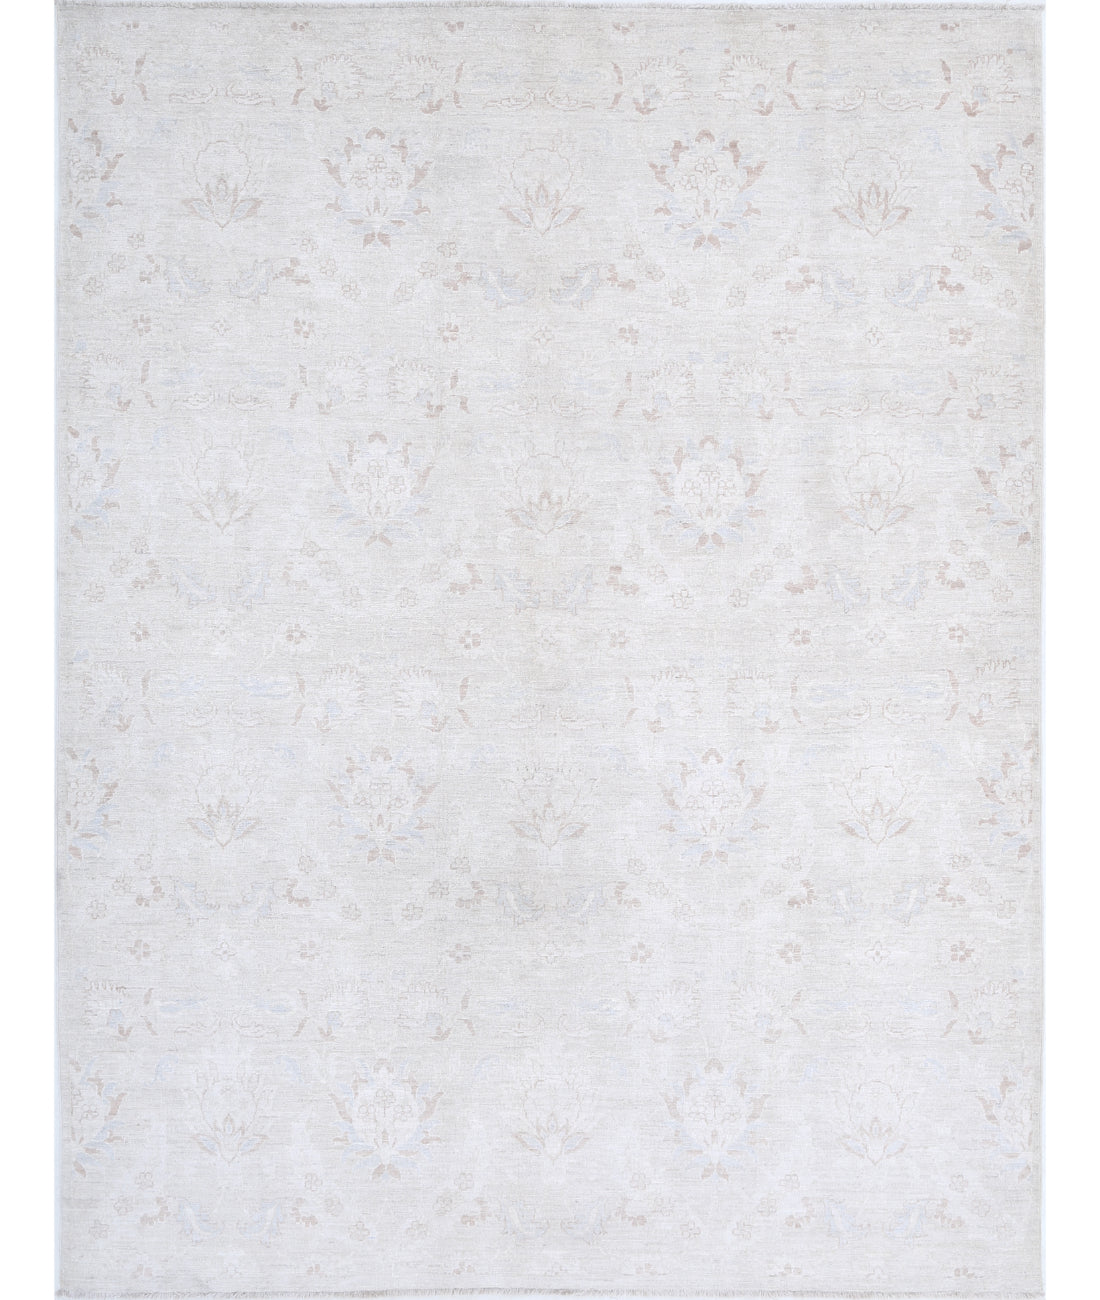 Hand Knotted Artemix Wool Rug - 6'2'' x 8'0'' 6'2'' x 8'0'' (185 X 240) / Ivory / Taupe